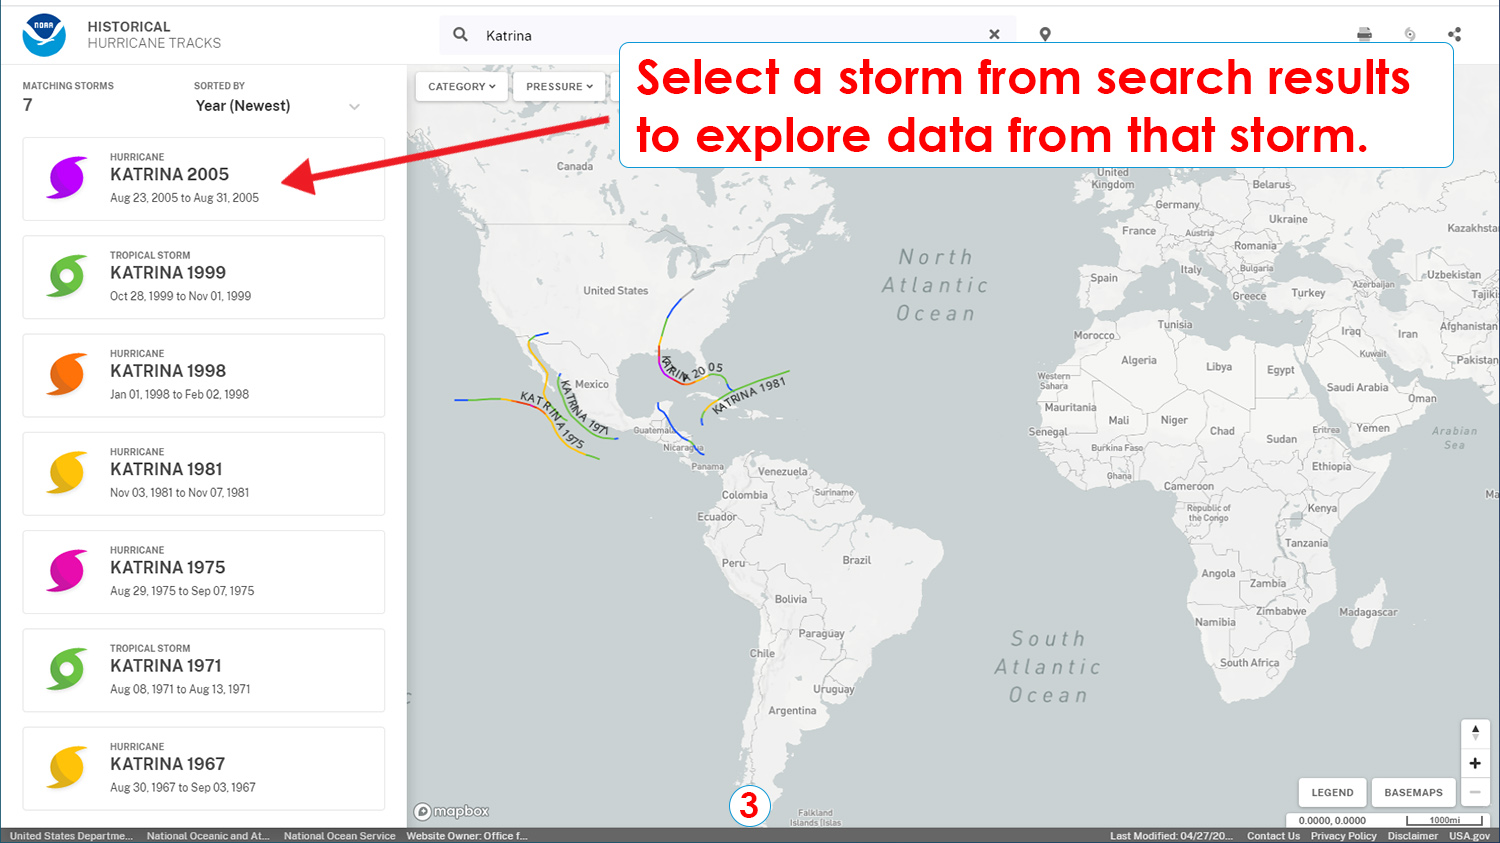 Step 3: Select a storm from search results to explore data from that storm.